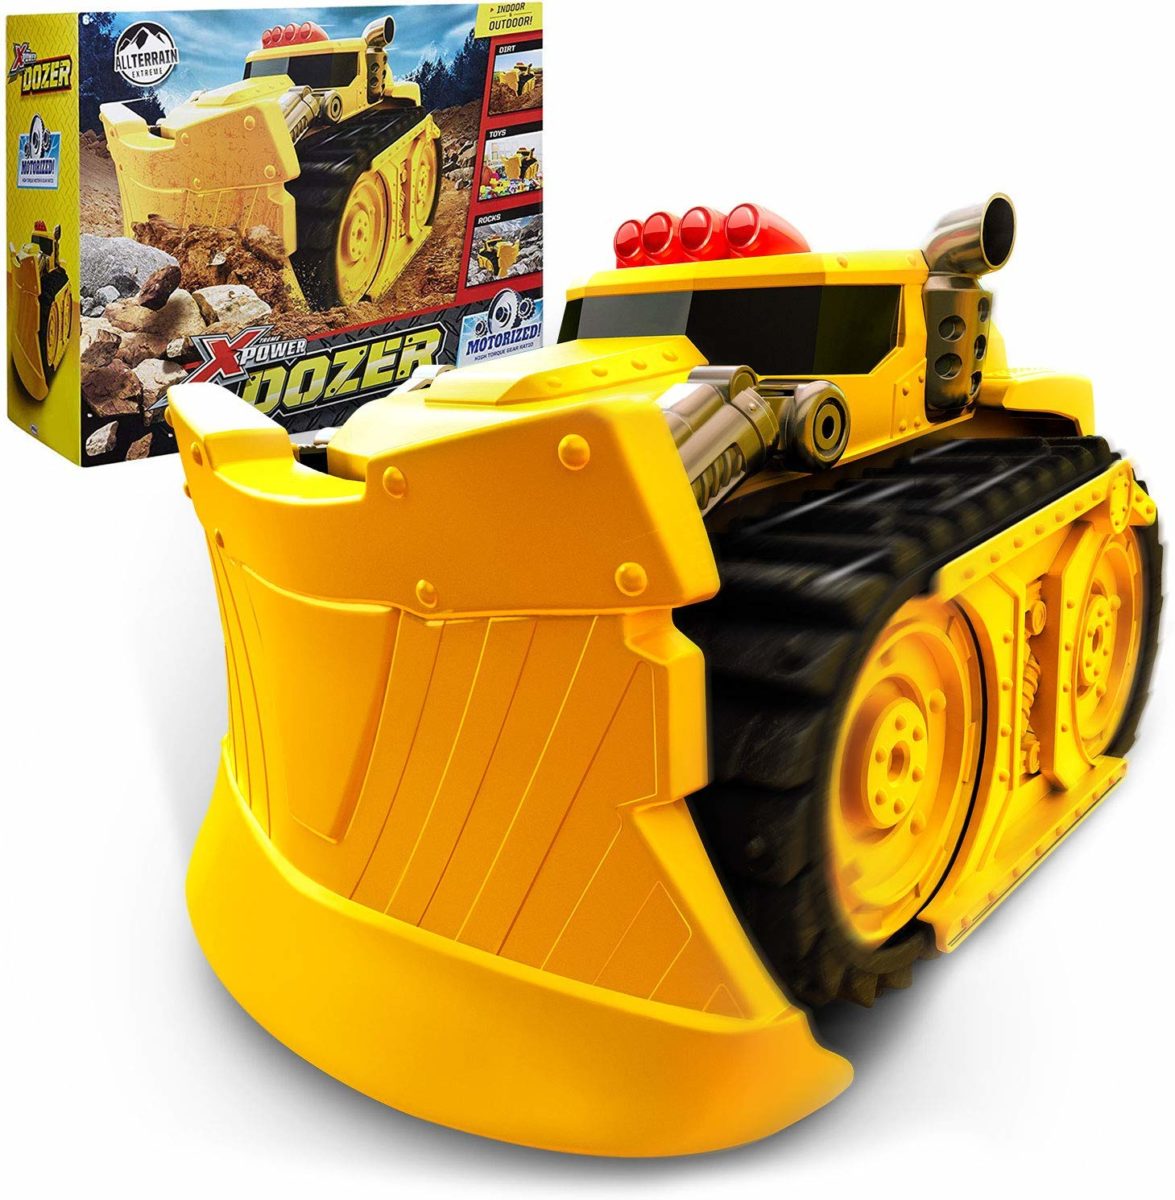 Xtreme Power Dozer Motorized Extreme Bulldozer Toy Truck - Top Toys and Gifts for Six Year Old Boys 1